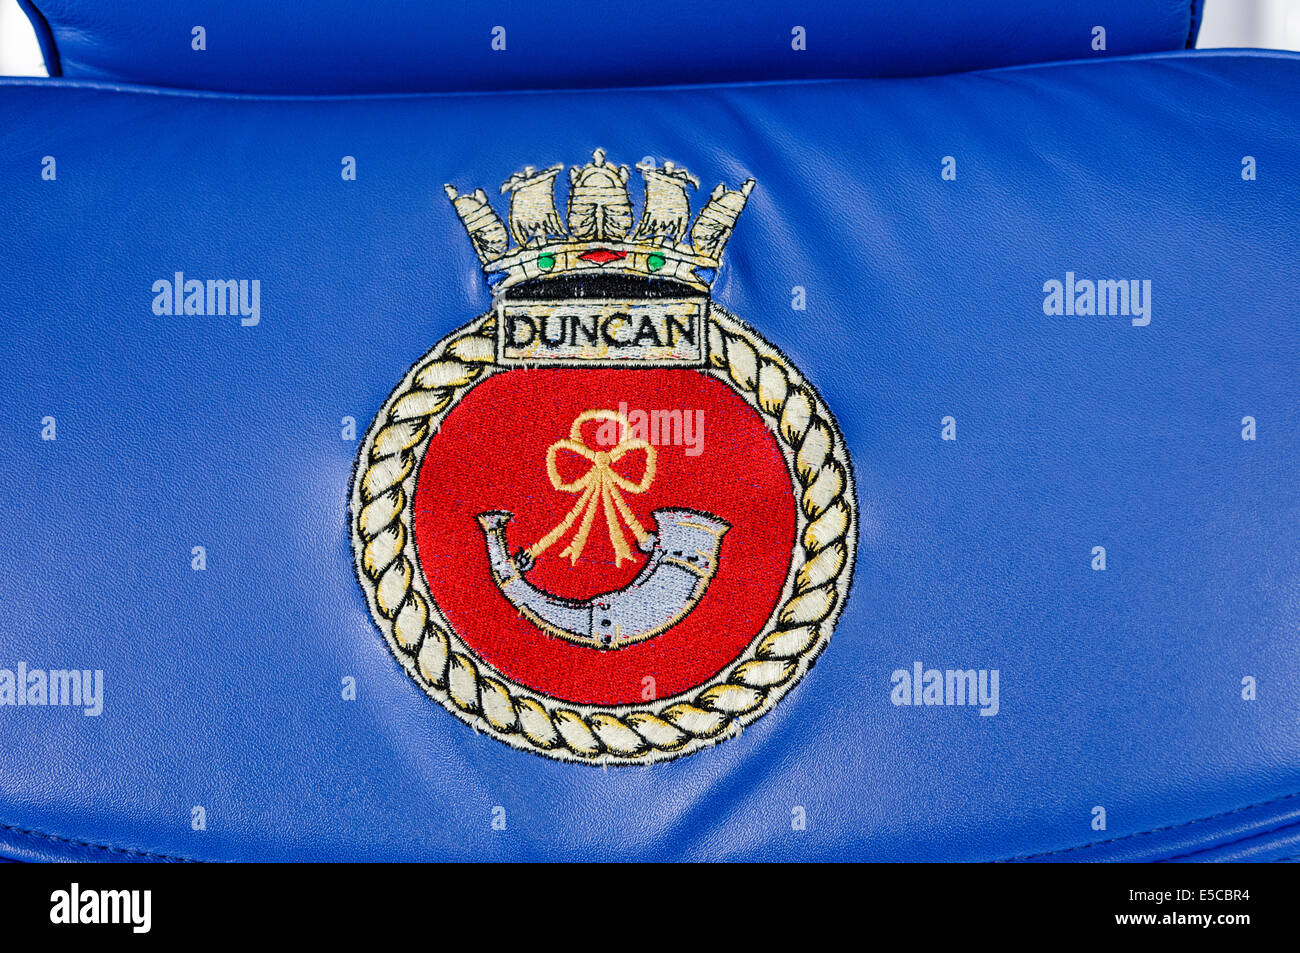 Belfast, Northern Ireland. 26/07/2014 - Insignia on the Captain's Chair of Type 45 destroyer HMS Duncan Credit:  Stephen Barnes/Alamy Live News Stock Photo